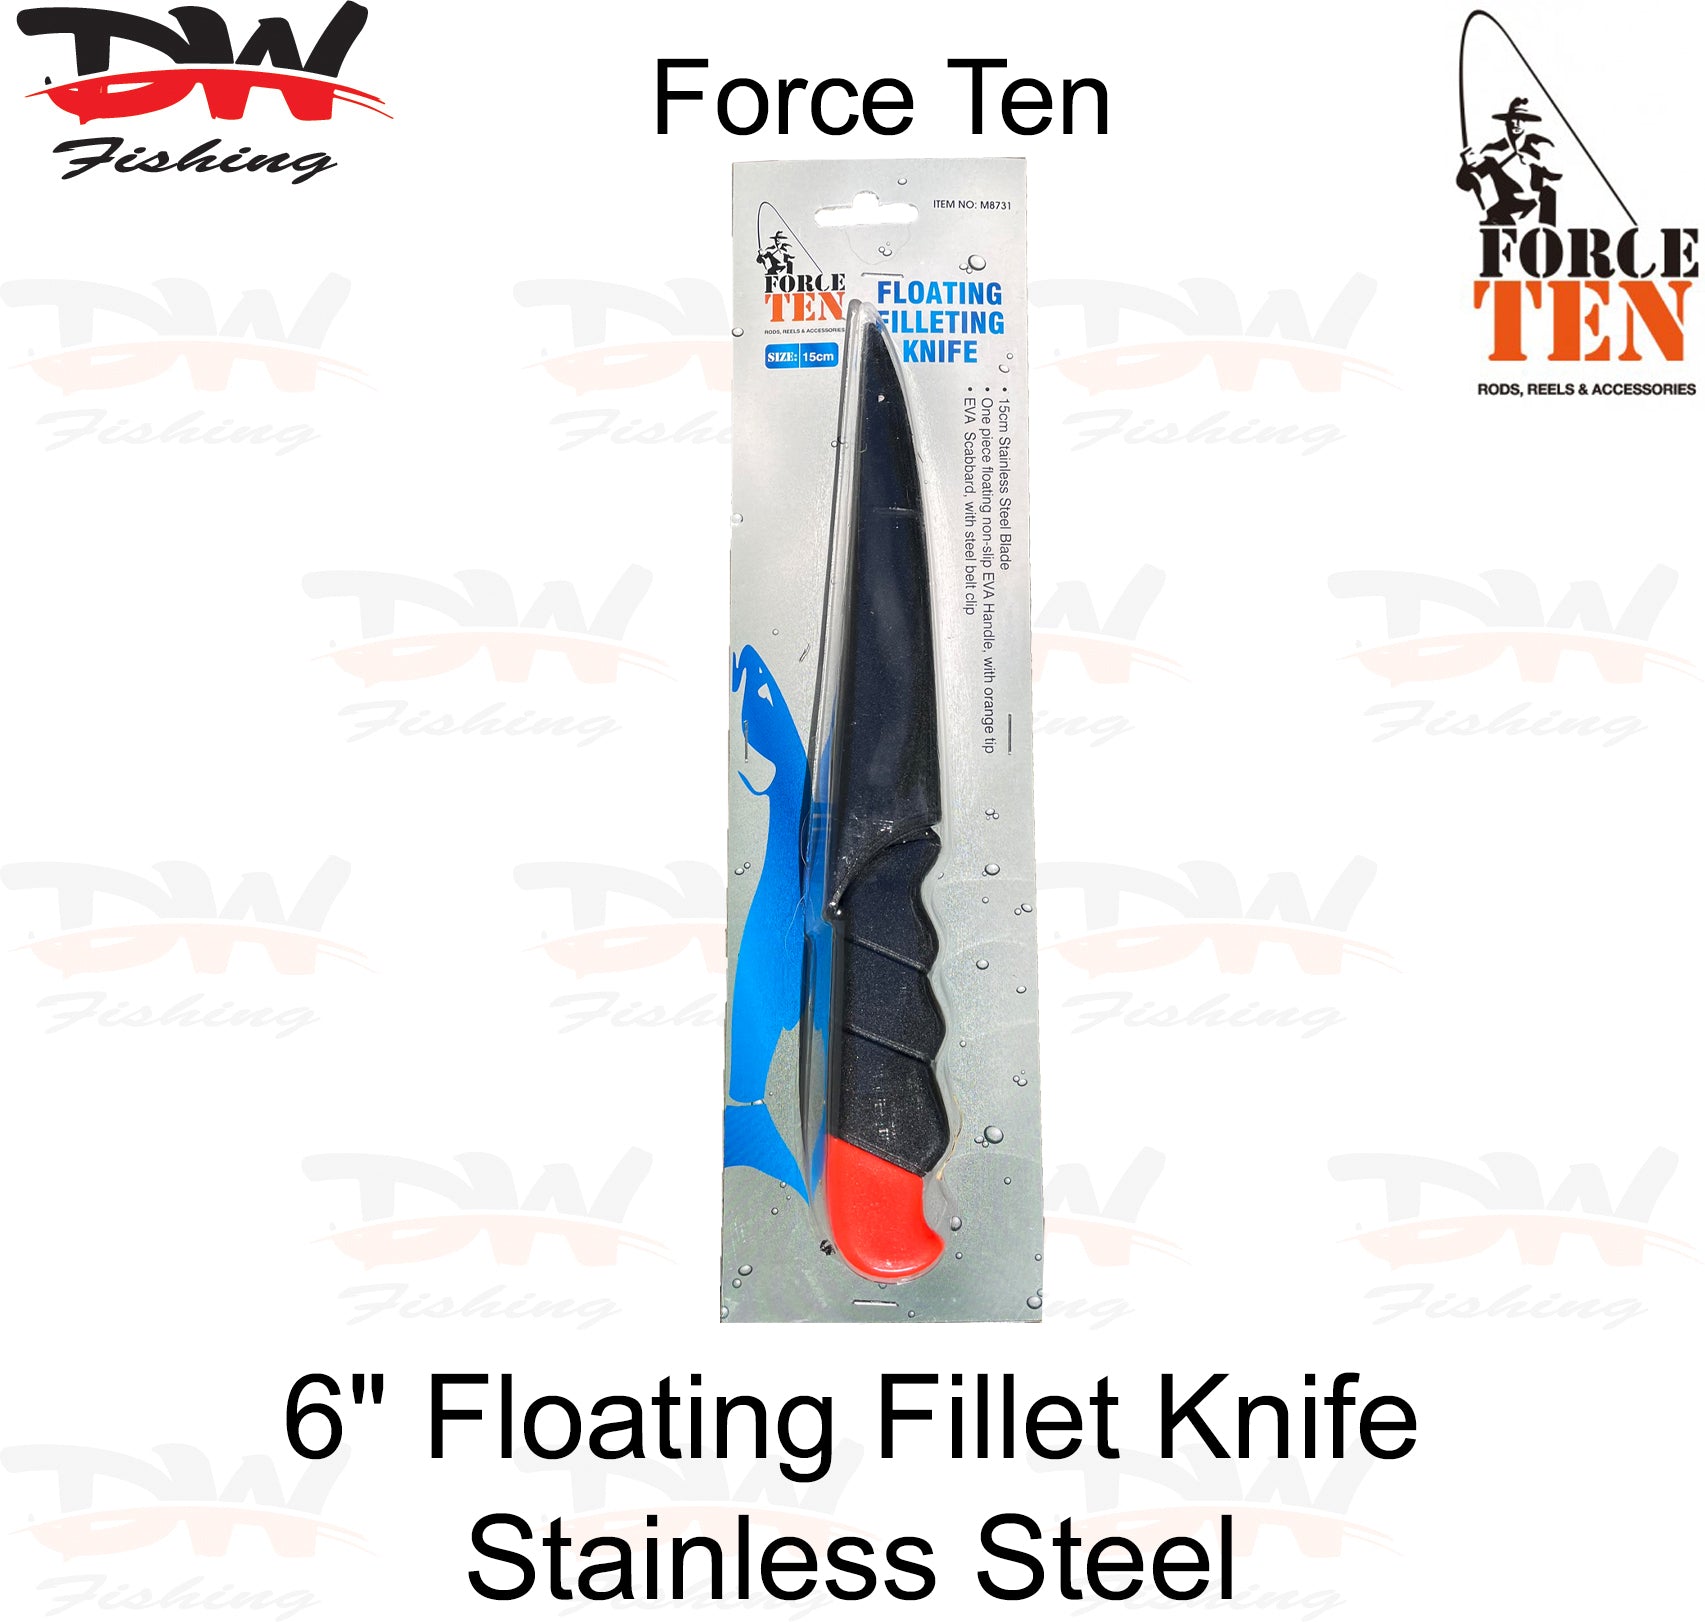 Force Ten brand fish fillet knife 15cm blade length with protective sheath front packet